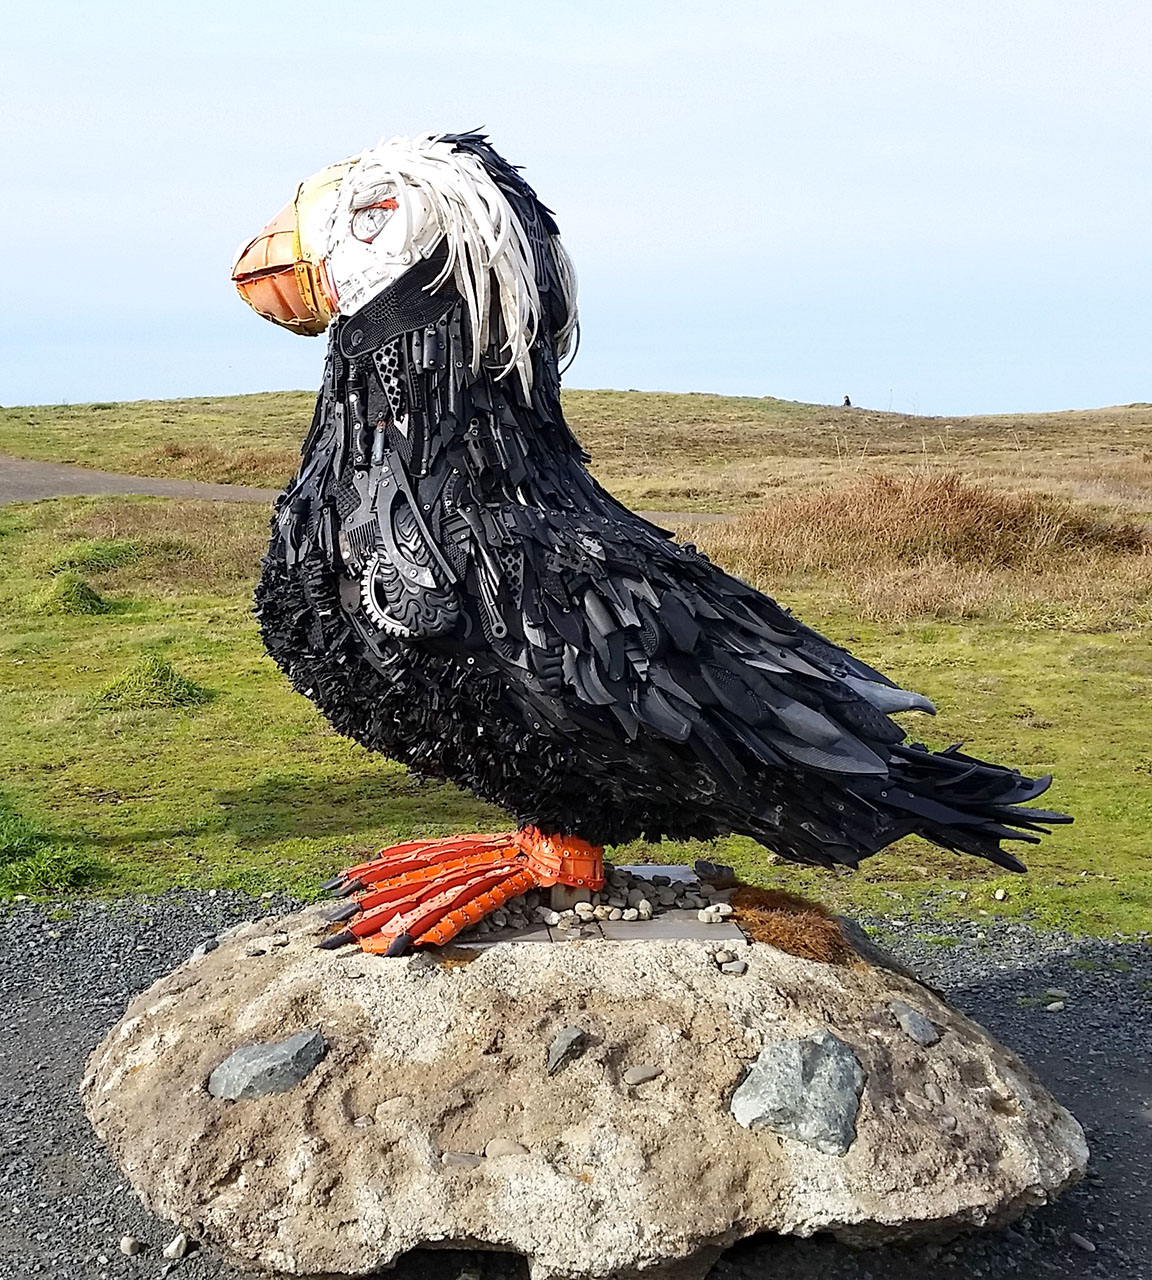 Cosmo the Tufted Puffin Art Sculpture by Washed Ashore Bandon Oregon s